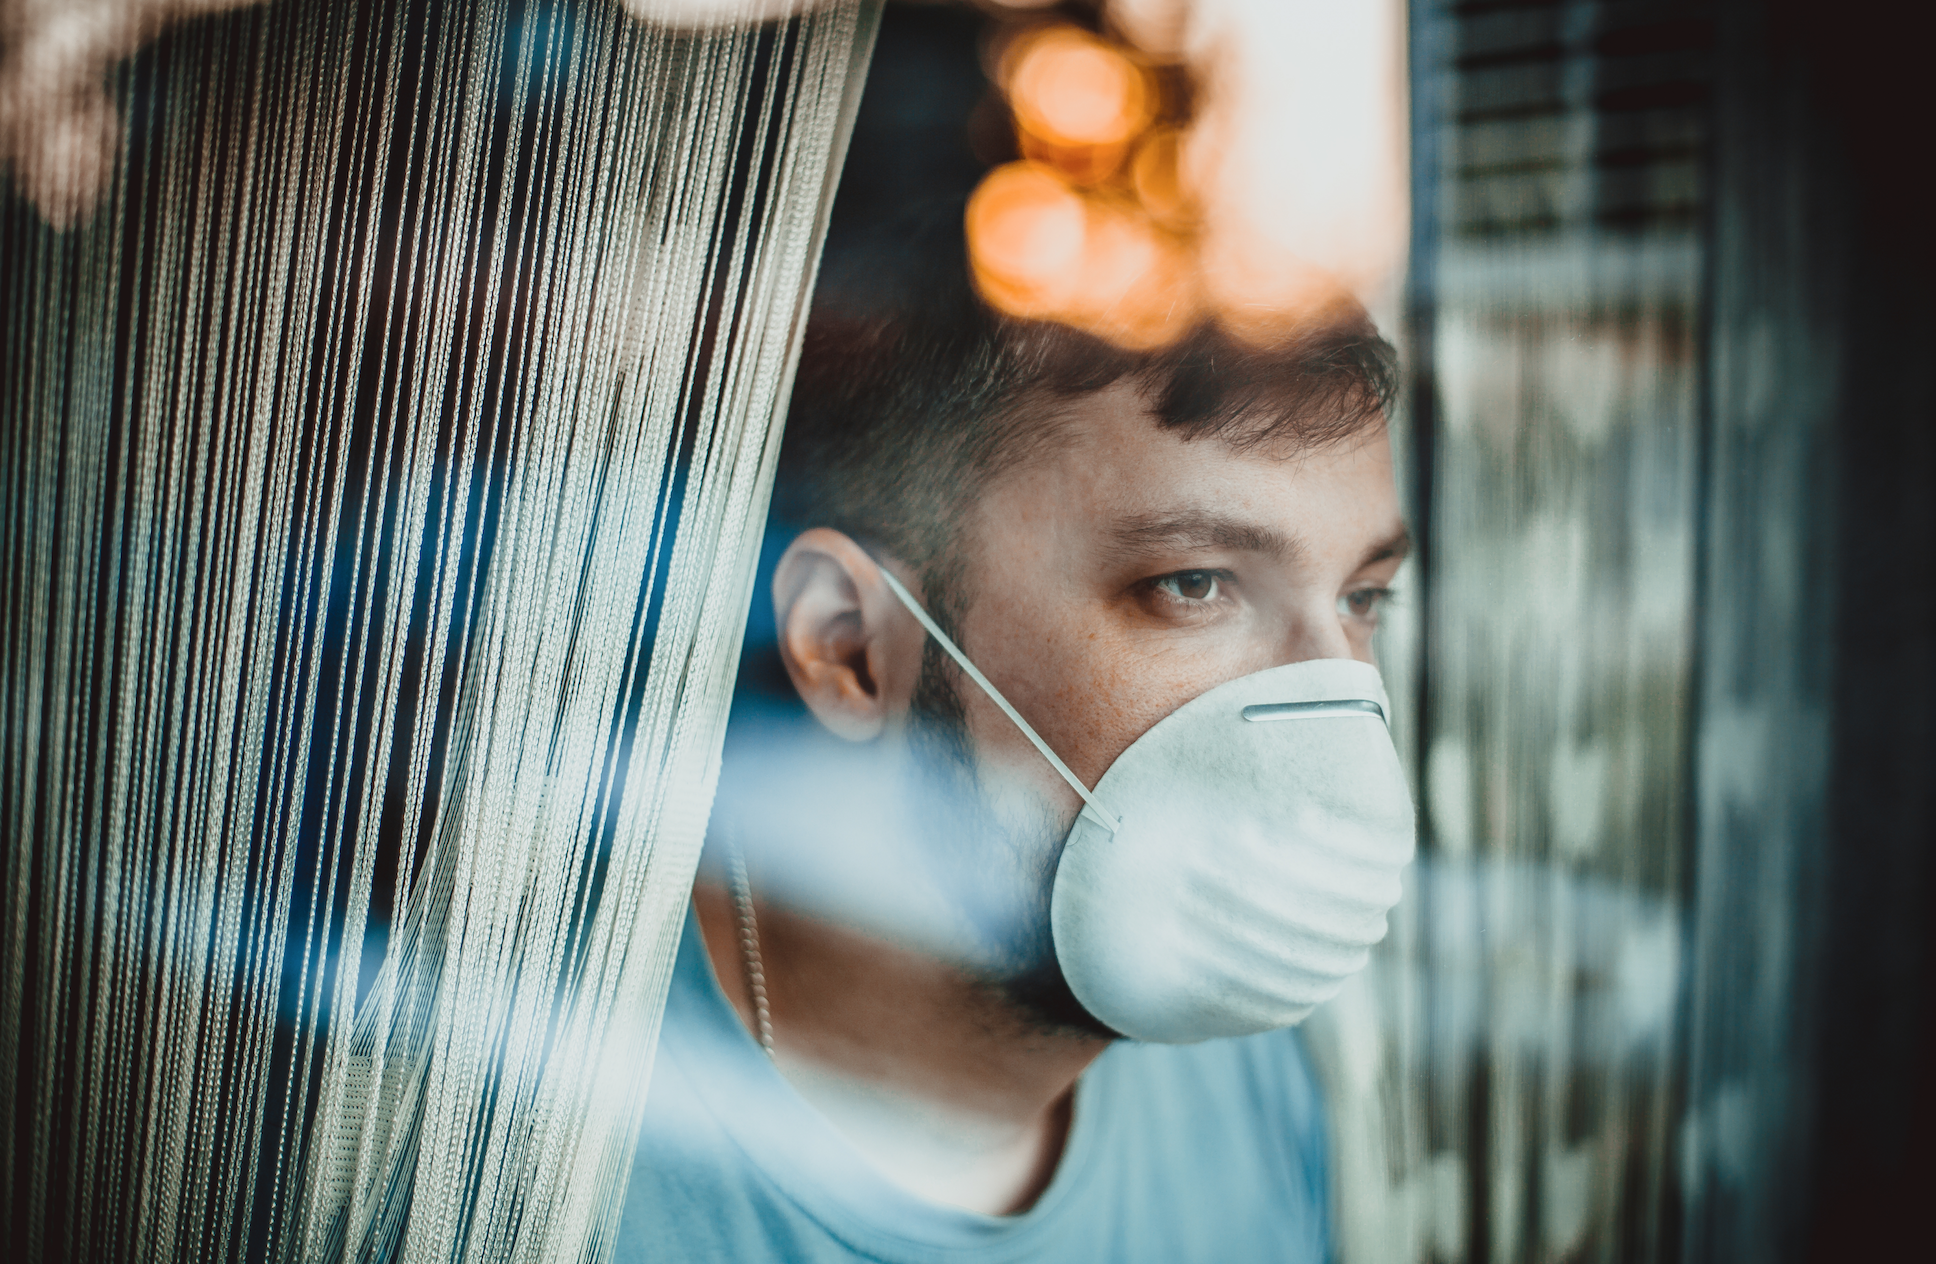 A patient with a surgical mask looks out a window